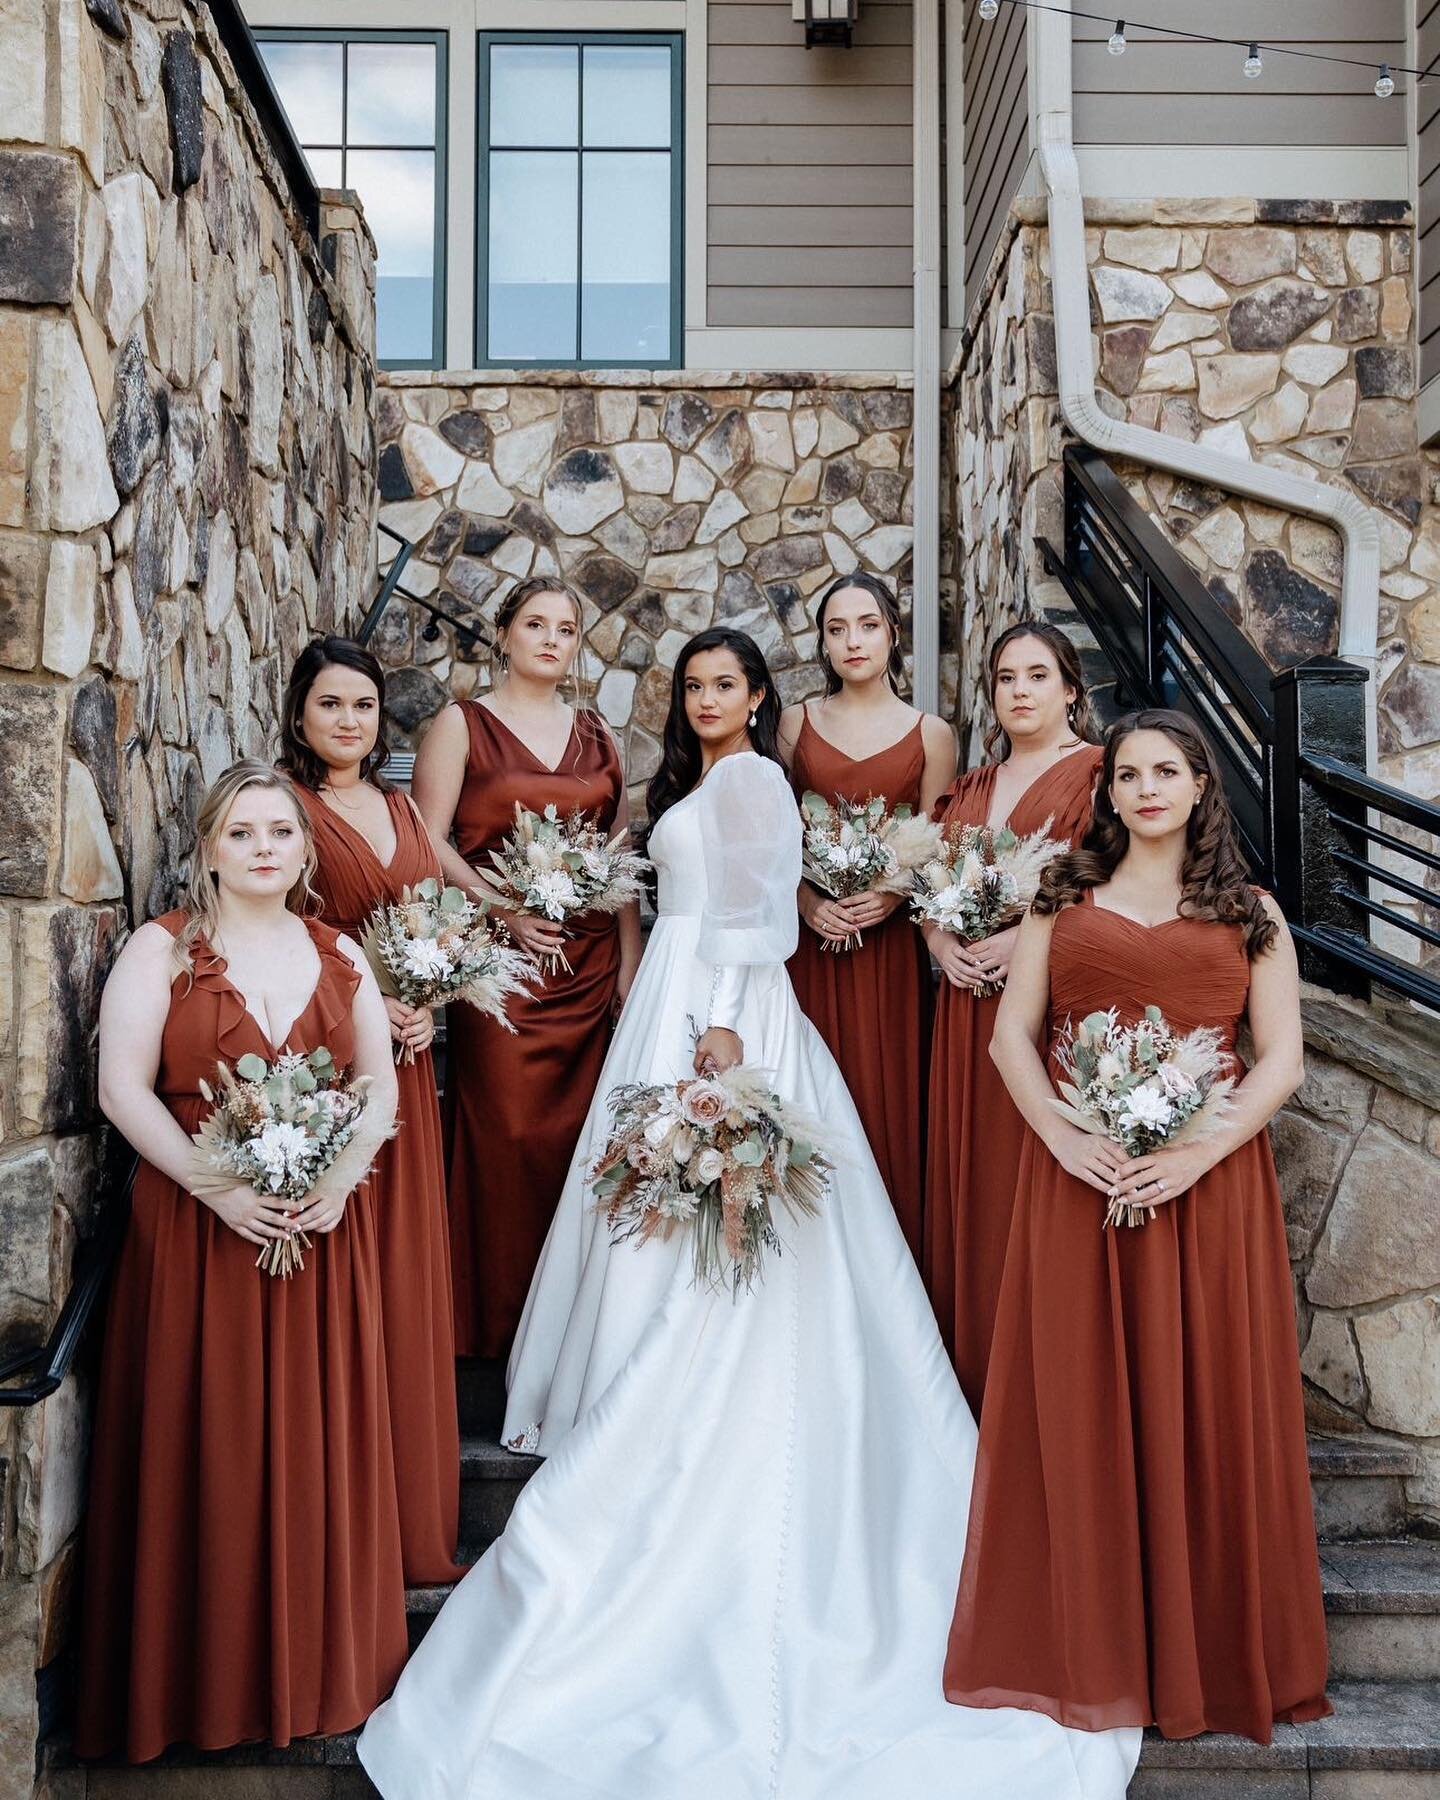 It makes our hearts burst with pride &amp; joy to see your best day ever come together 🤍

Bride l @neesaparkinson 
Venue | @springcreekgolfclub
Photography | @thehomebodyfolk
Video | @elevated_media
Florals | @lobofloral &amp; @bohoboise
Planning &a